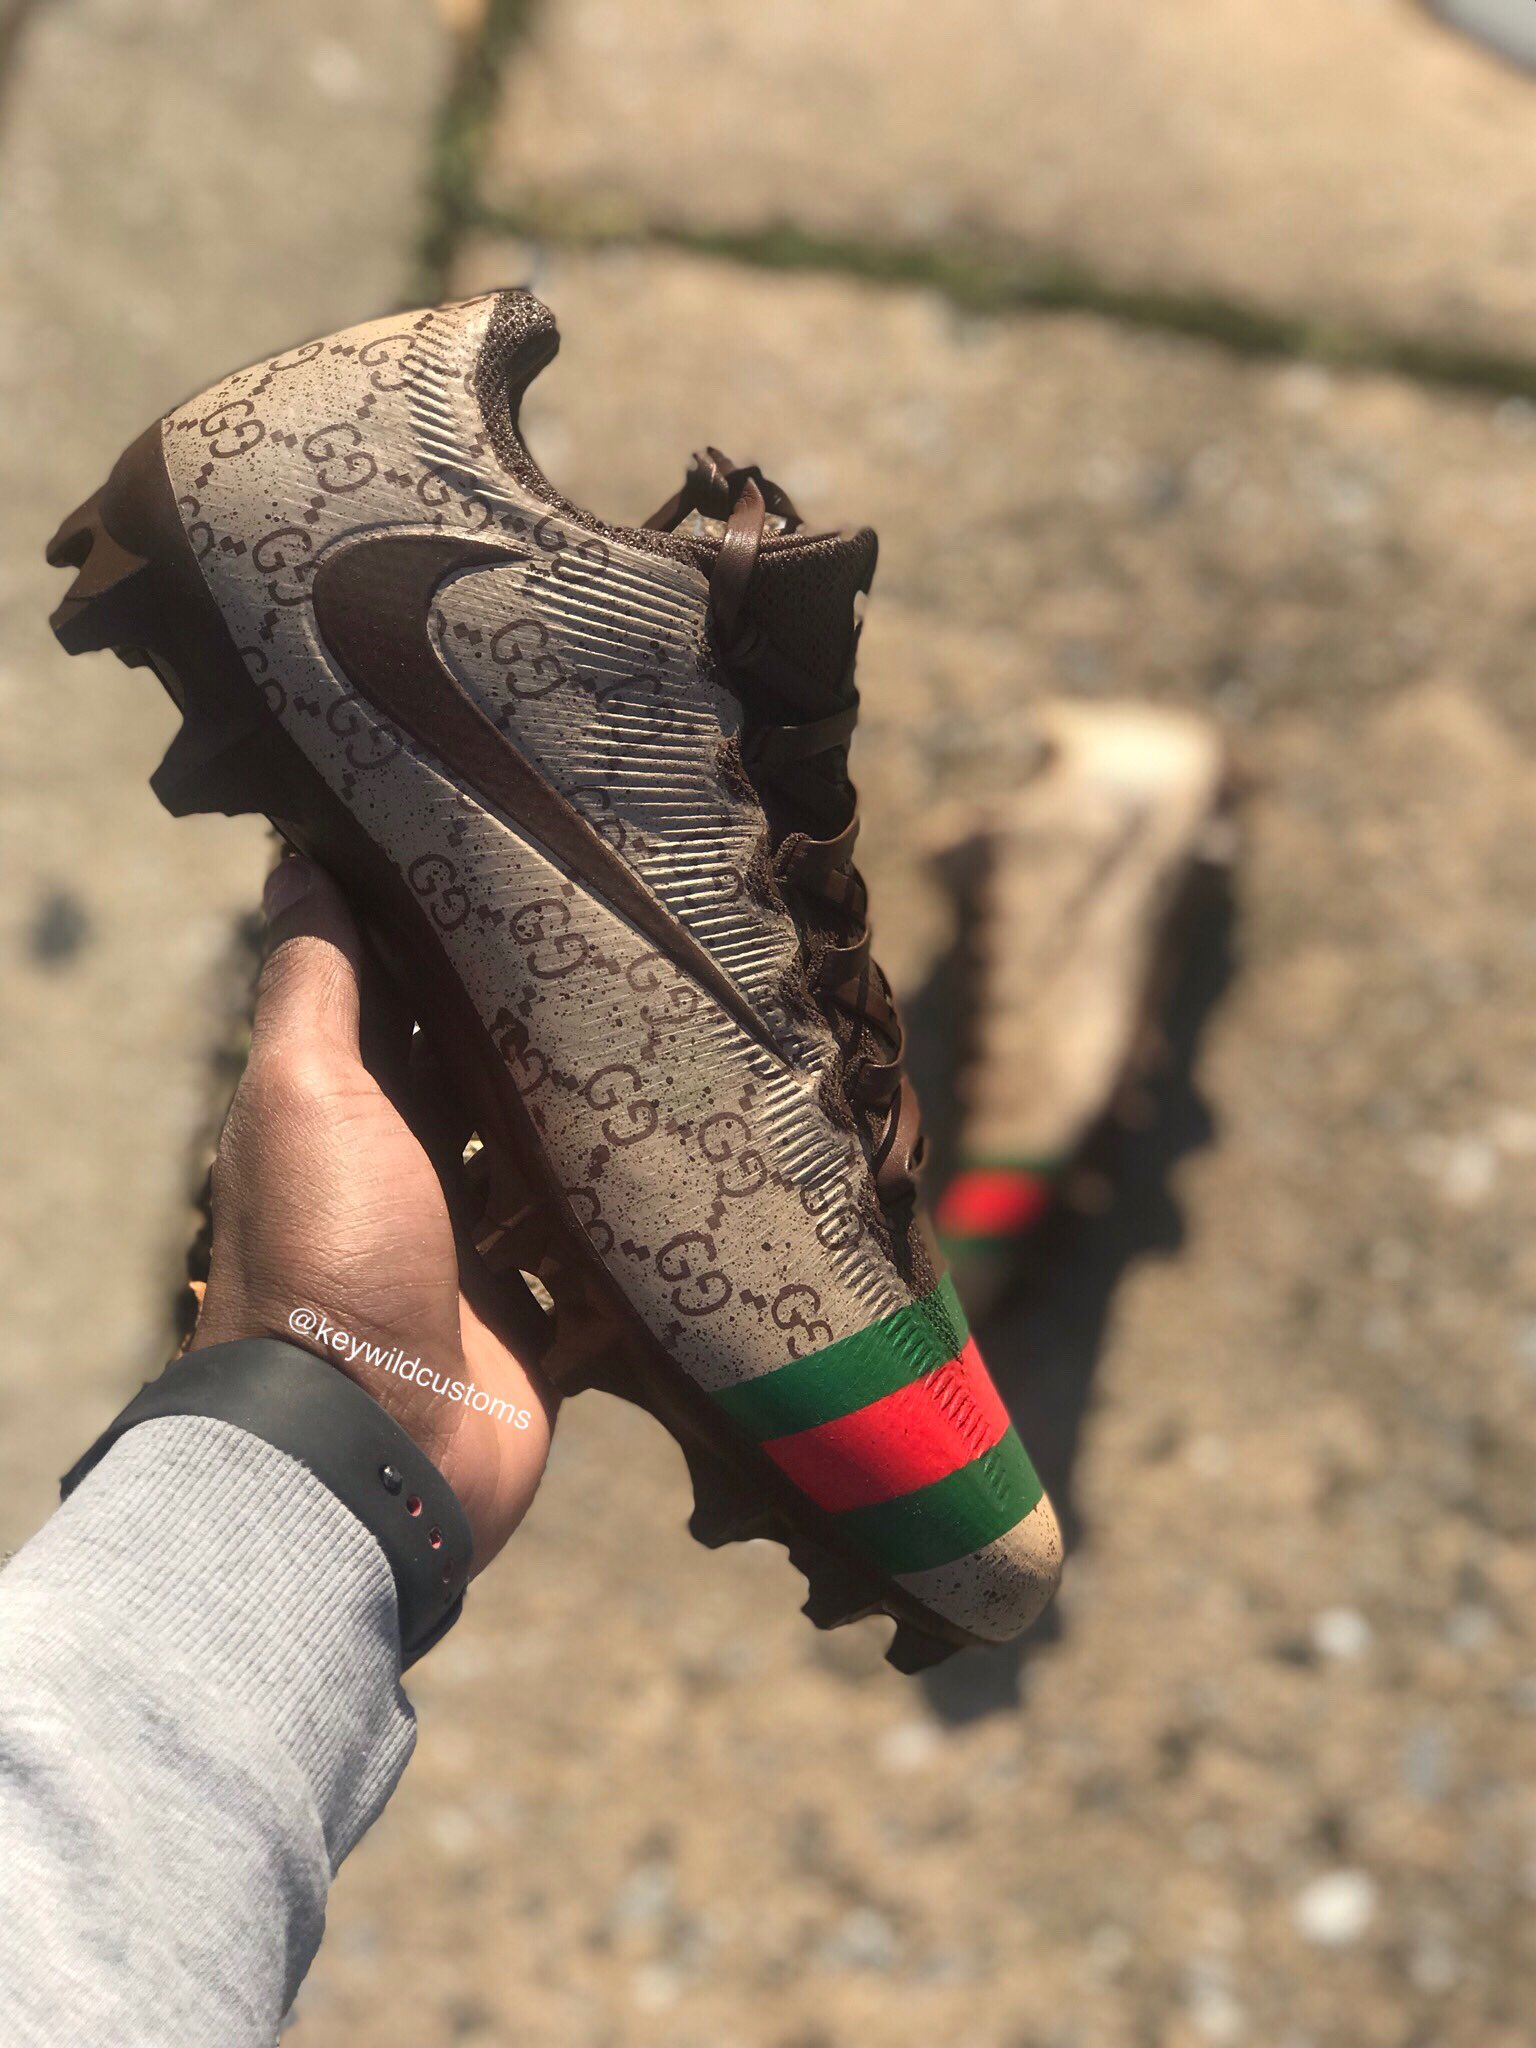 gucci soccer cleats